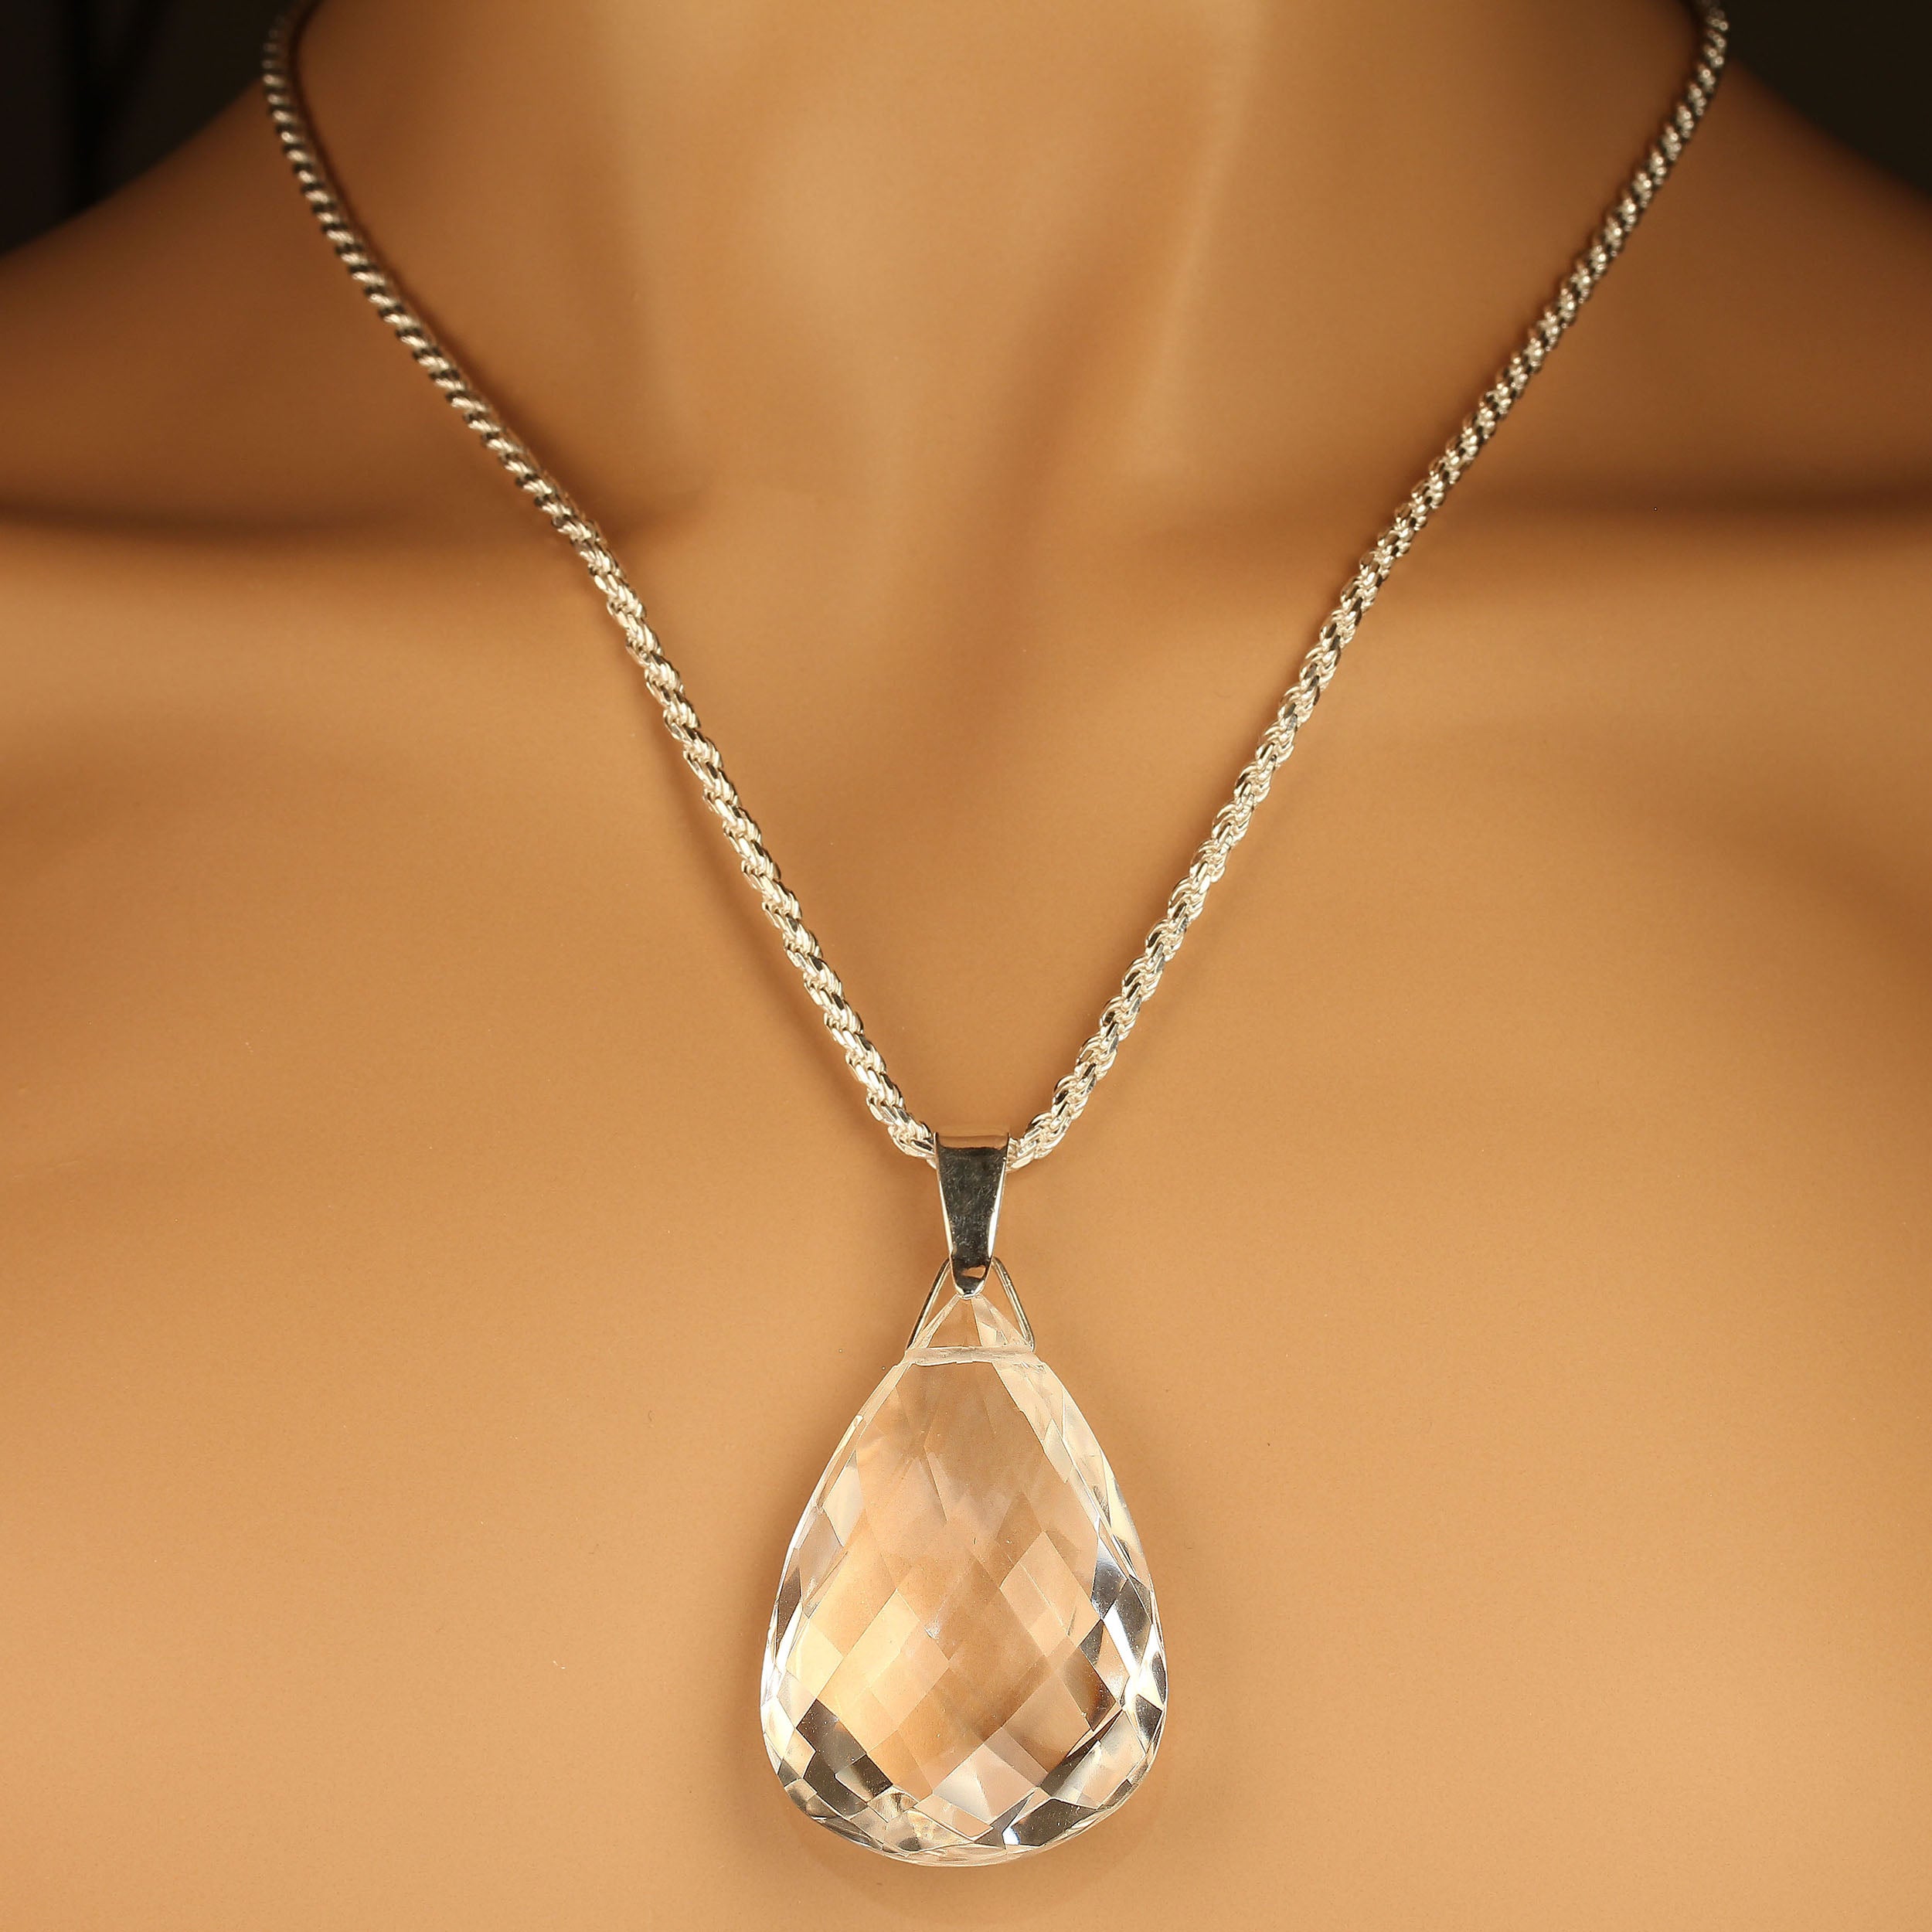 AJD Sparkling Faceted Crystal Pendant 132 Carats For Sale